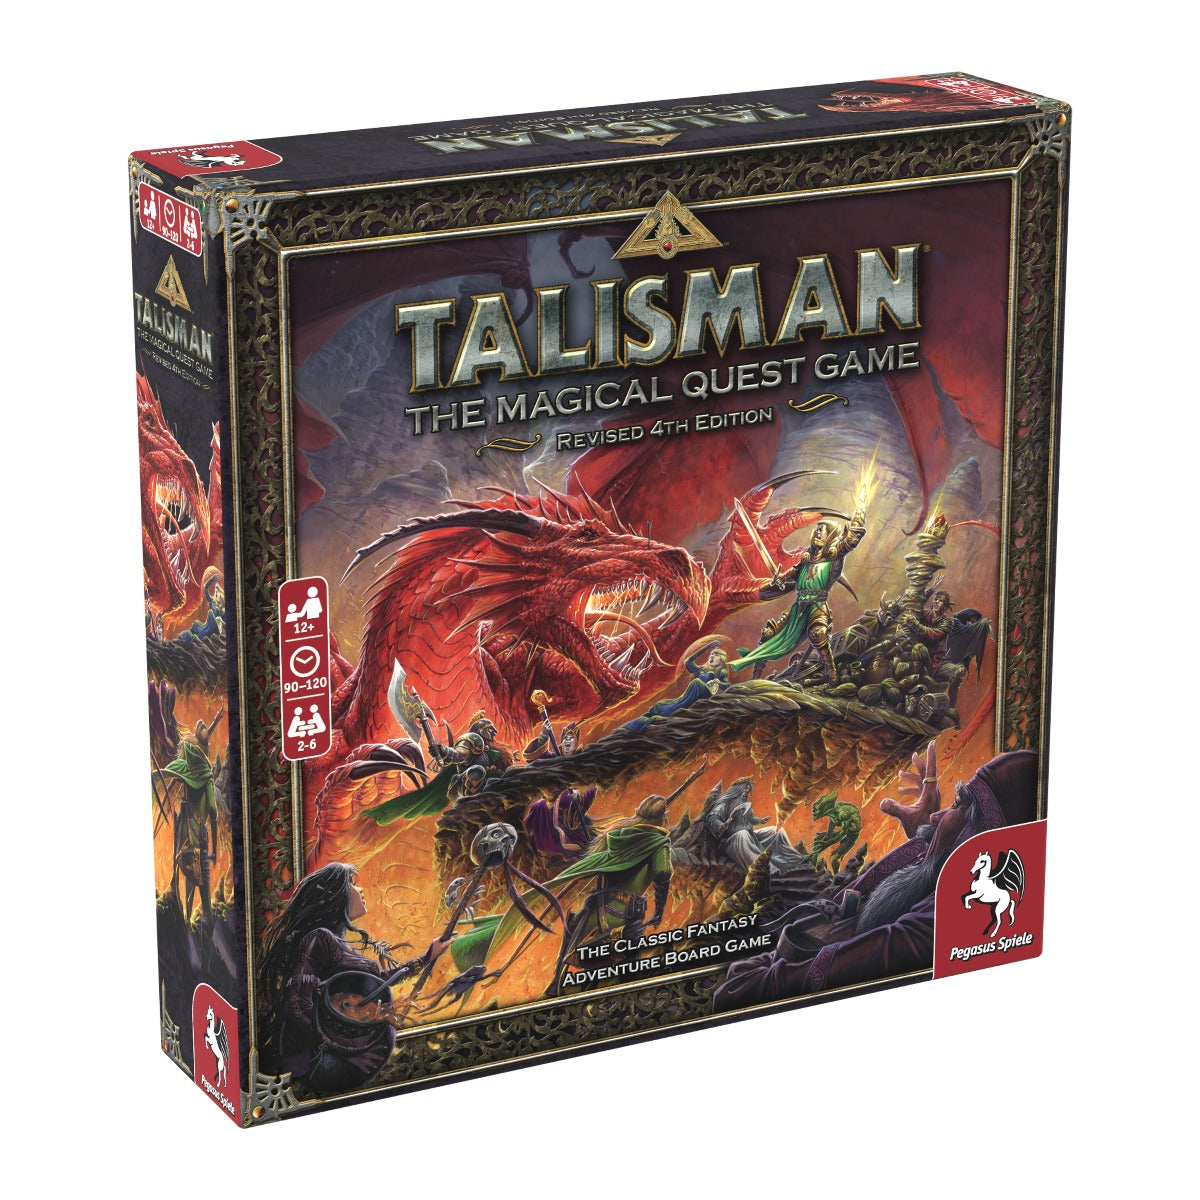 Talisman Revised 4th Edition, The Magical Quest Game, Adventure Game, Eventyr, Board Game, Brætspil, Pegasus Spiele